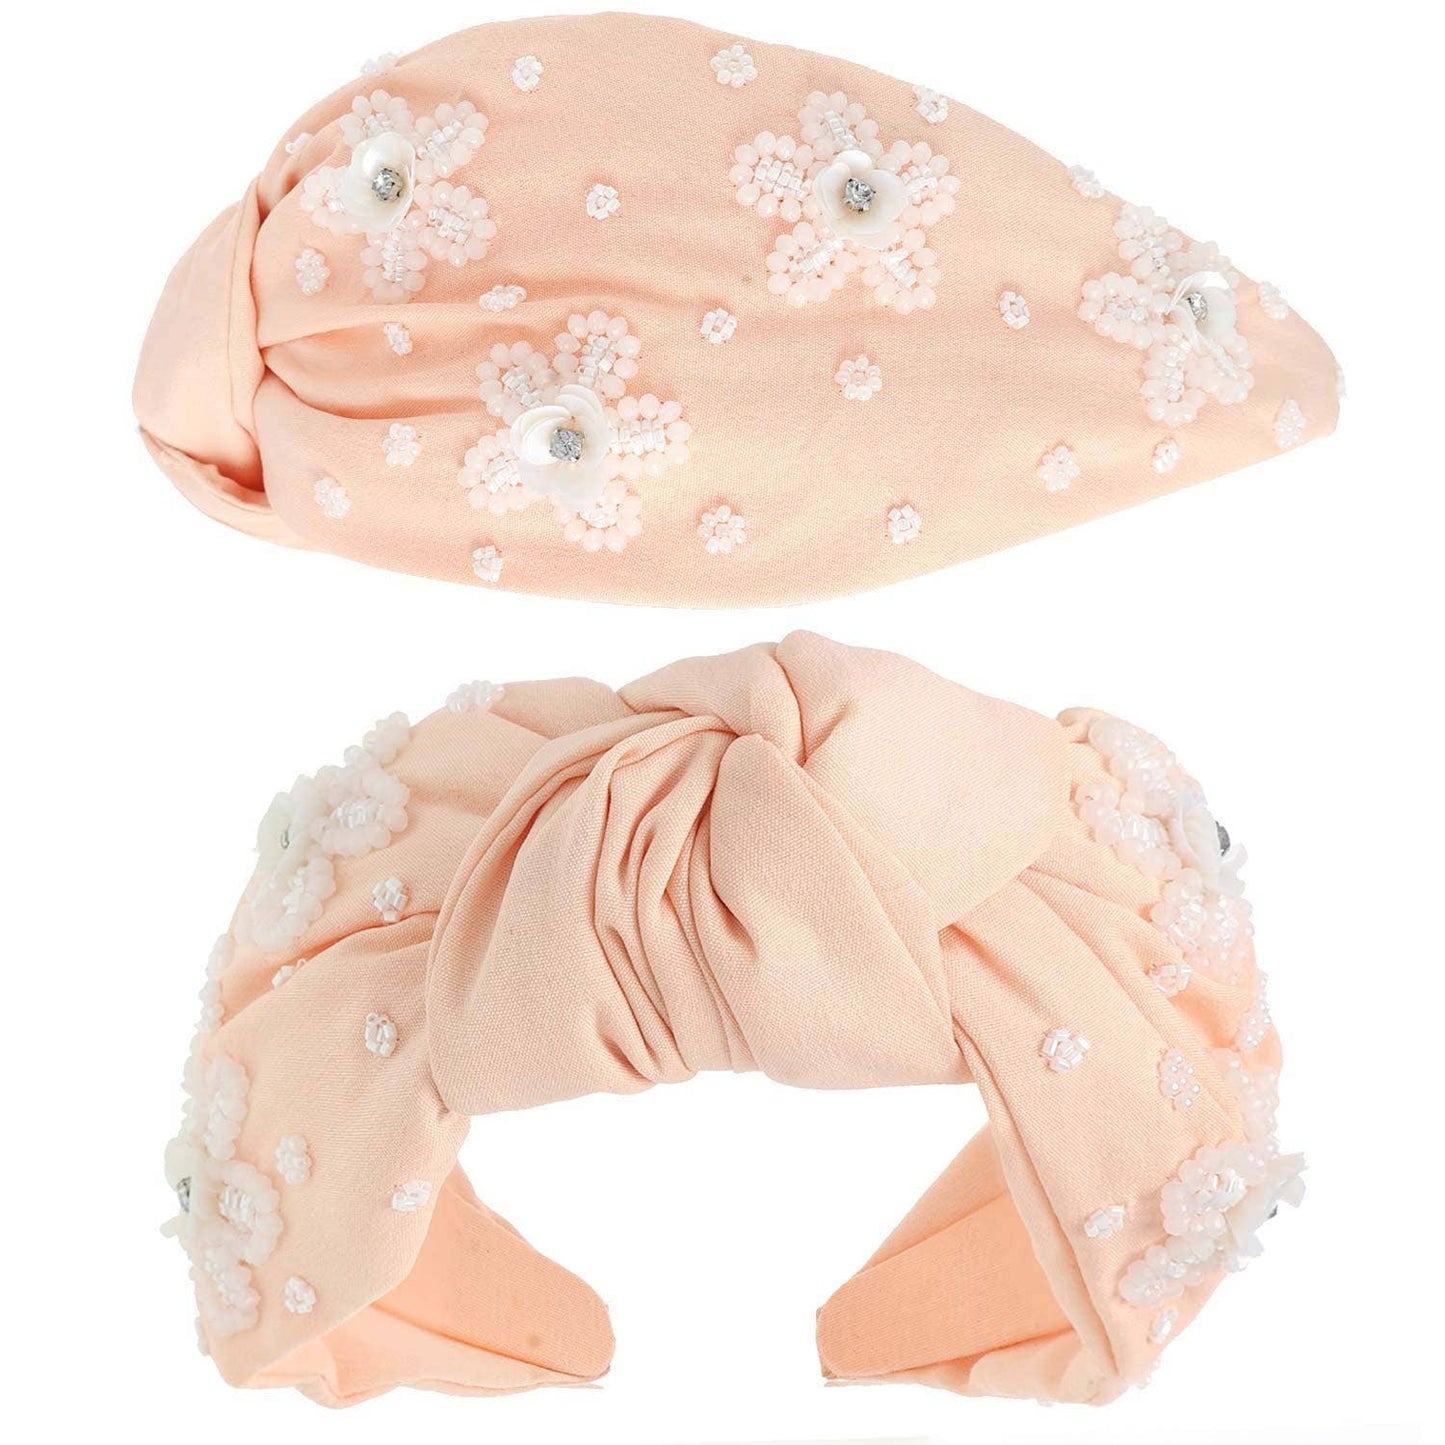 Peach Floral Beaded Jeweled Top Knotted Headband